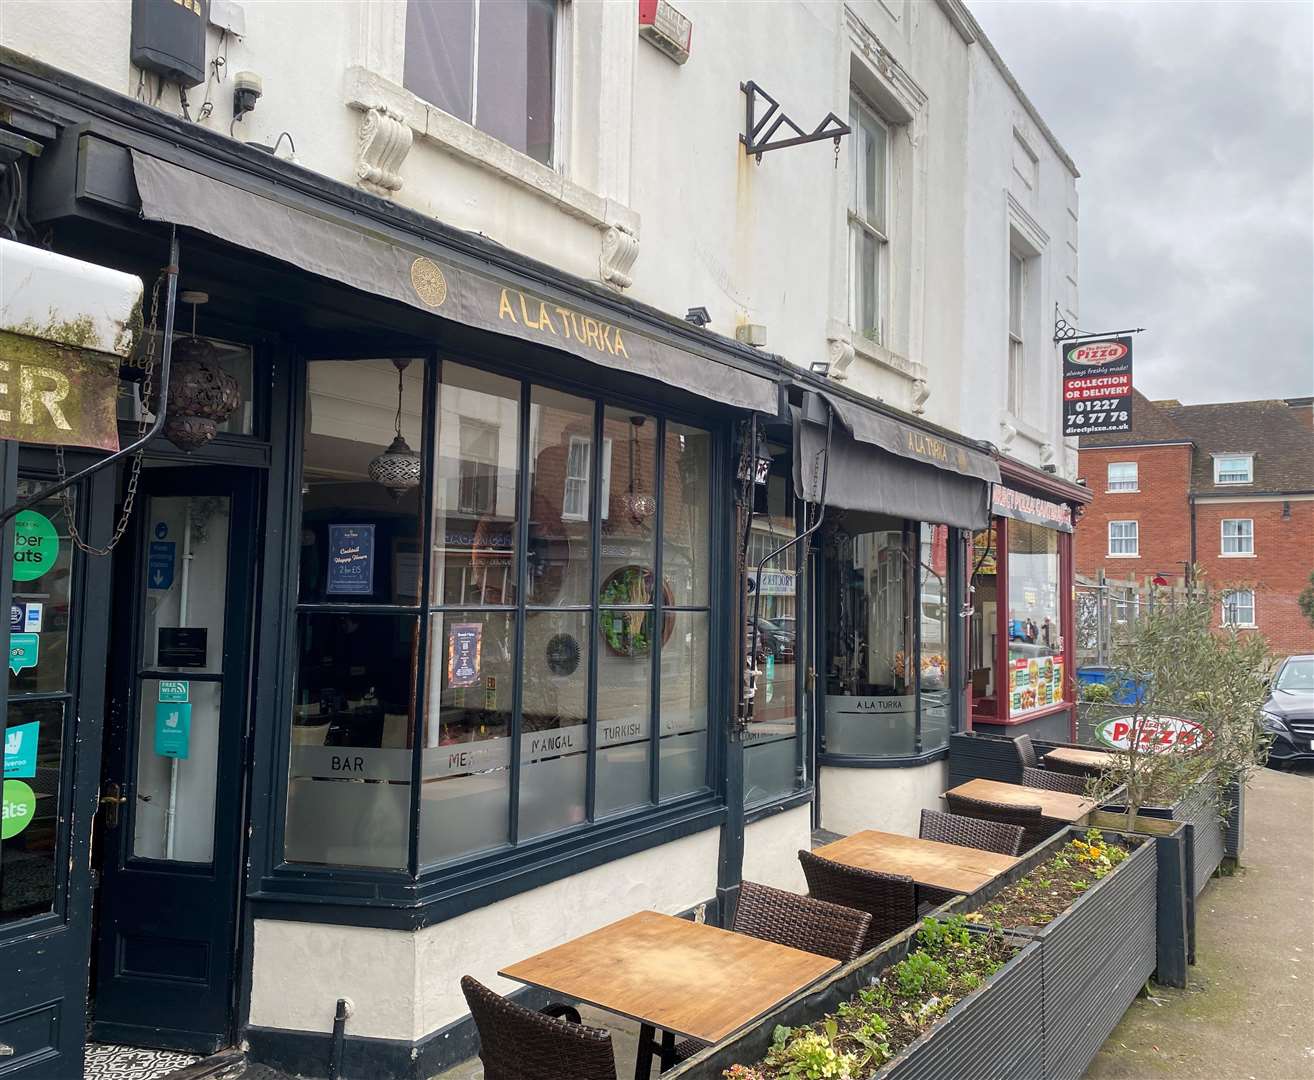 A La Turka in Northgate, Canterbury, was given a two-star food hygiene rating earlier this year before getting an improved score of four stars